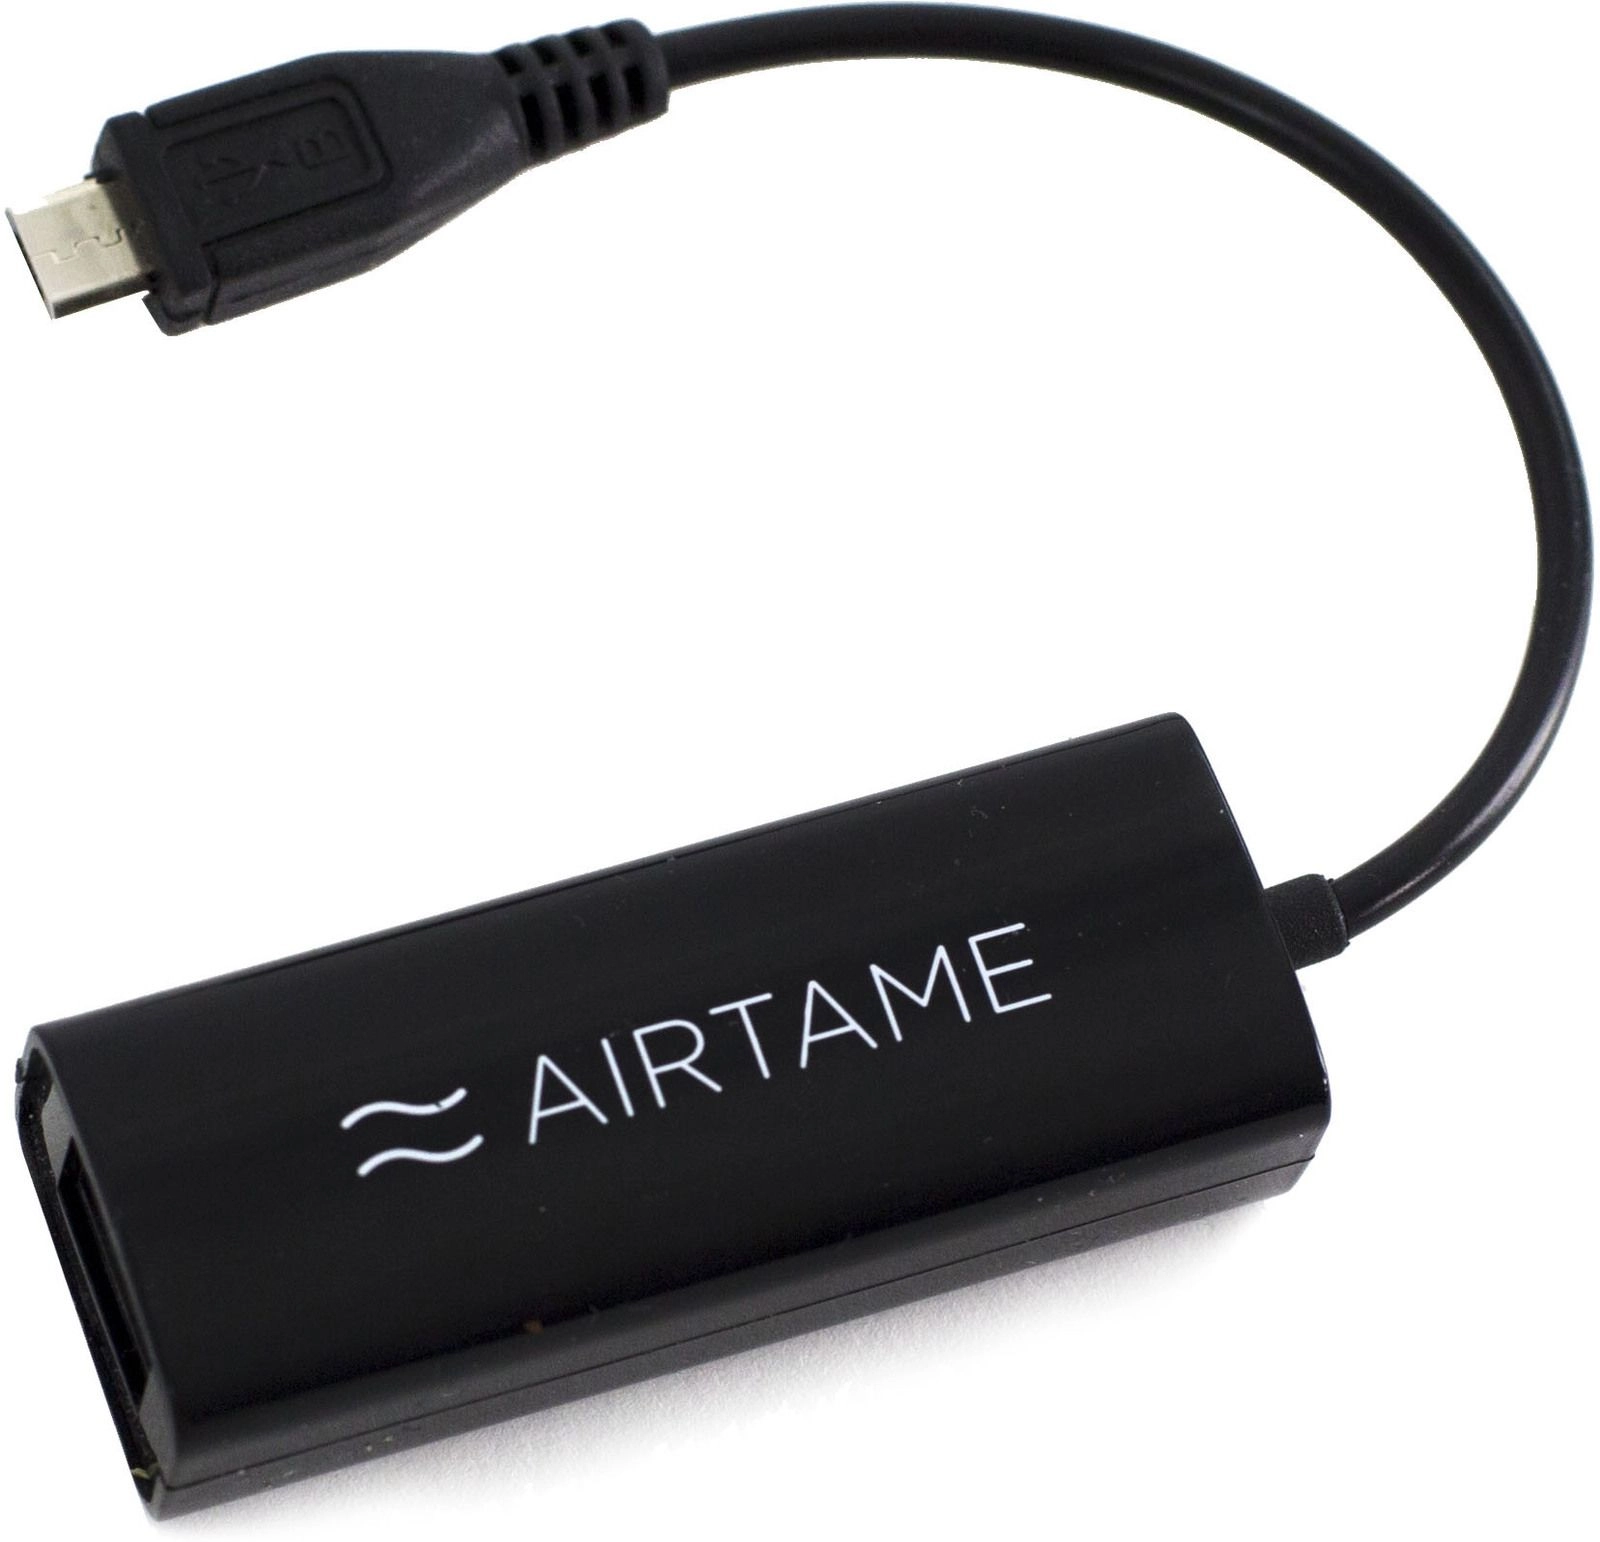 Airtame Ethernet Adapter B-Ware